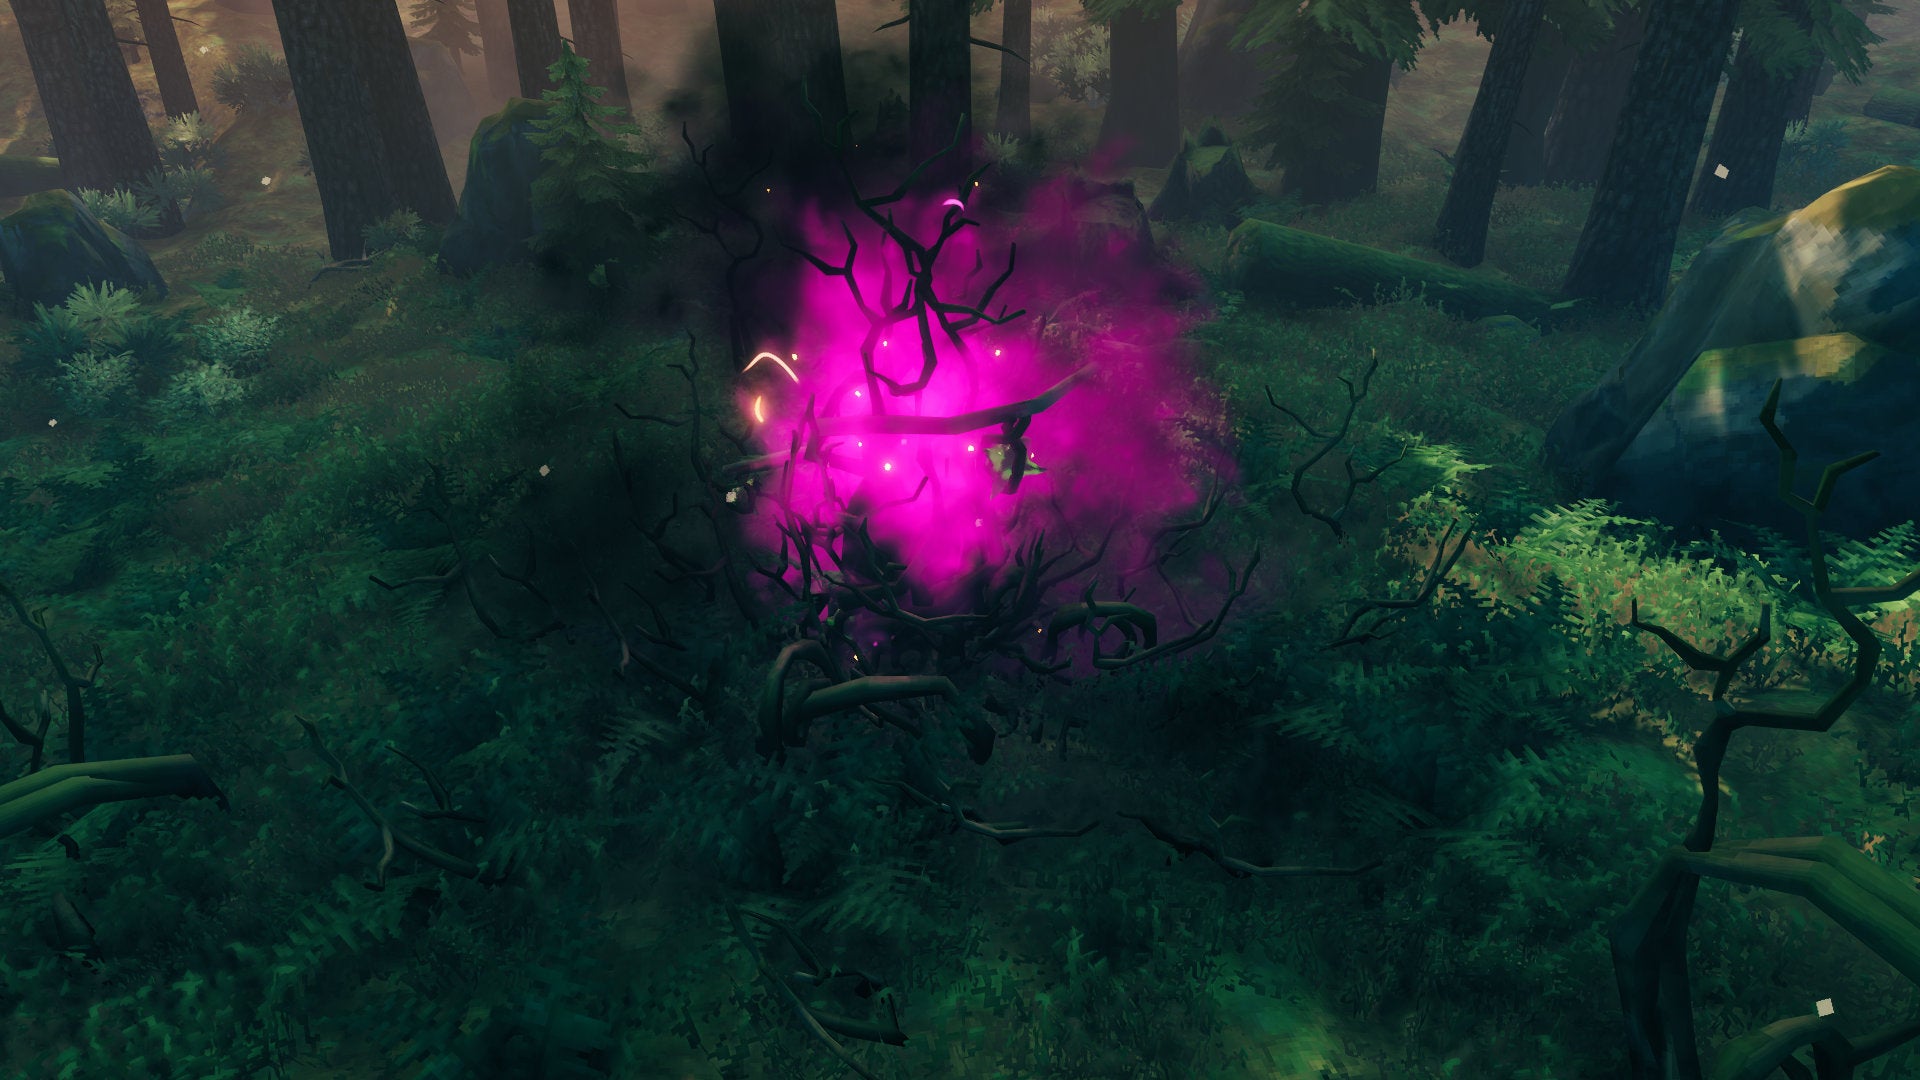 A Valheim screenshot of a Greydwarf spawner, a source of Ancient Seeds found in the Black Forest.